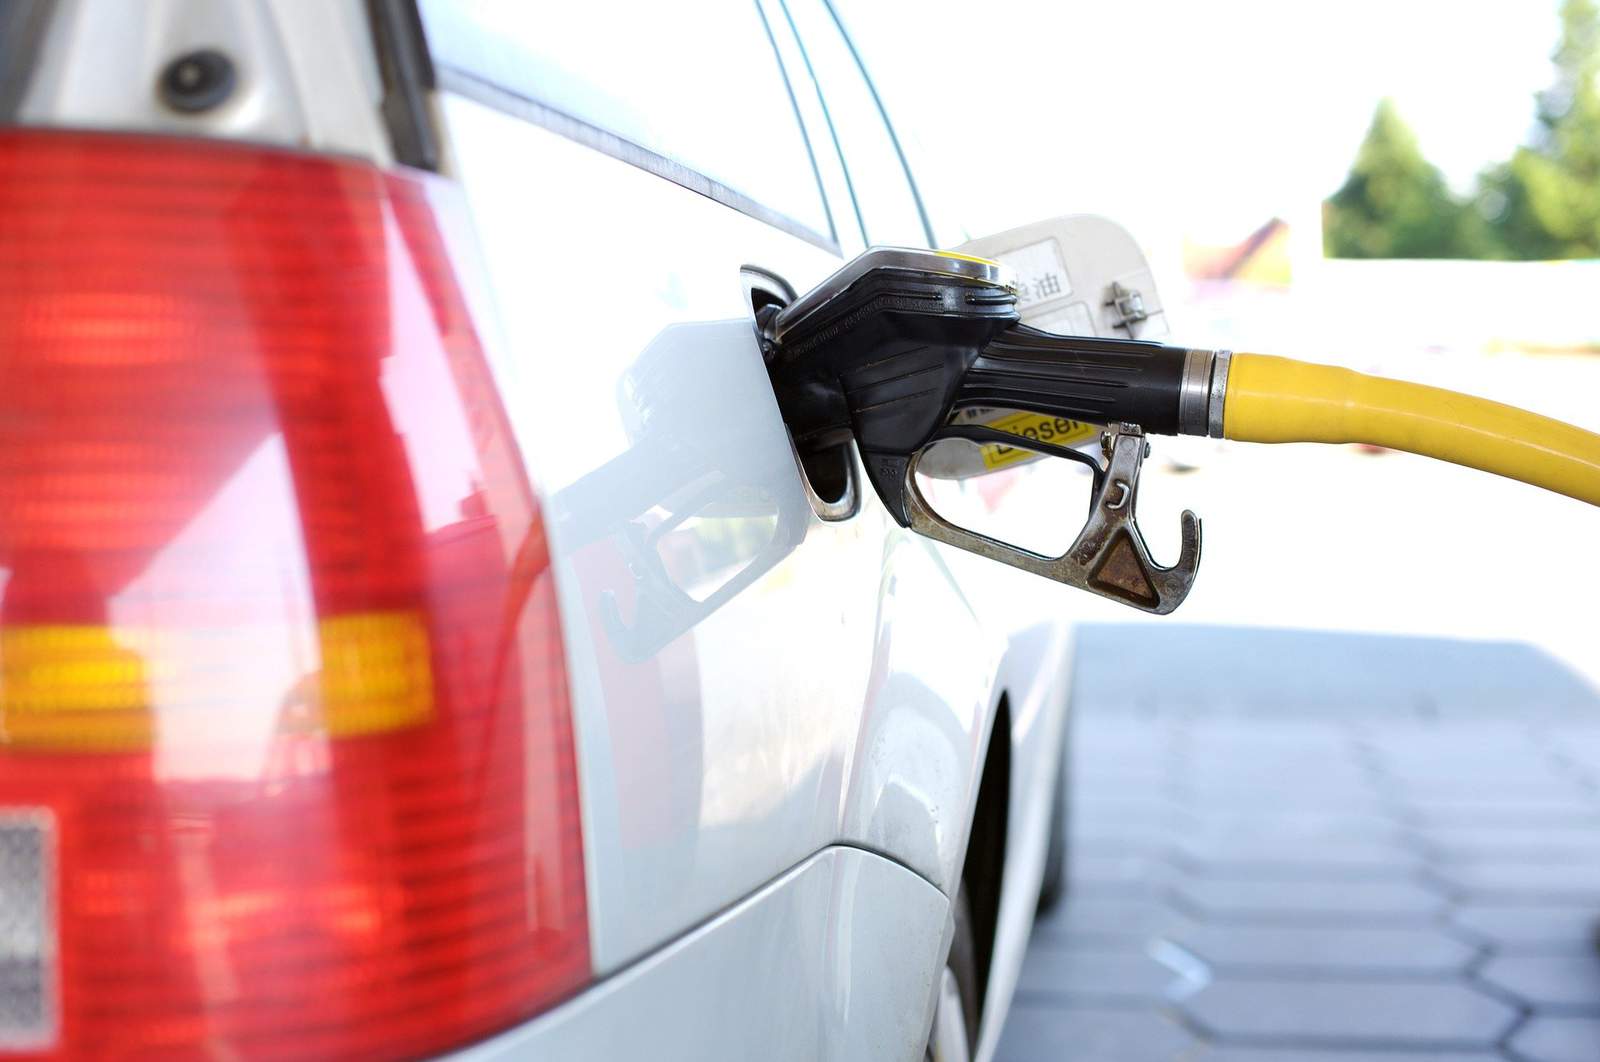 AAA Michigan gas report March 29, 2021: Prices decline 4 cents